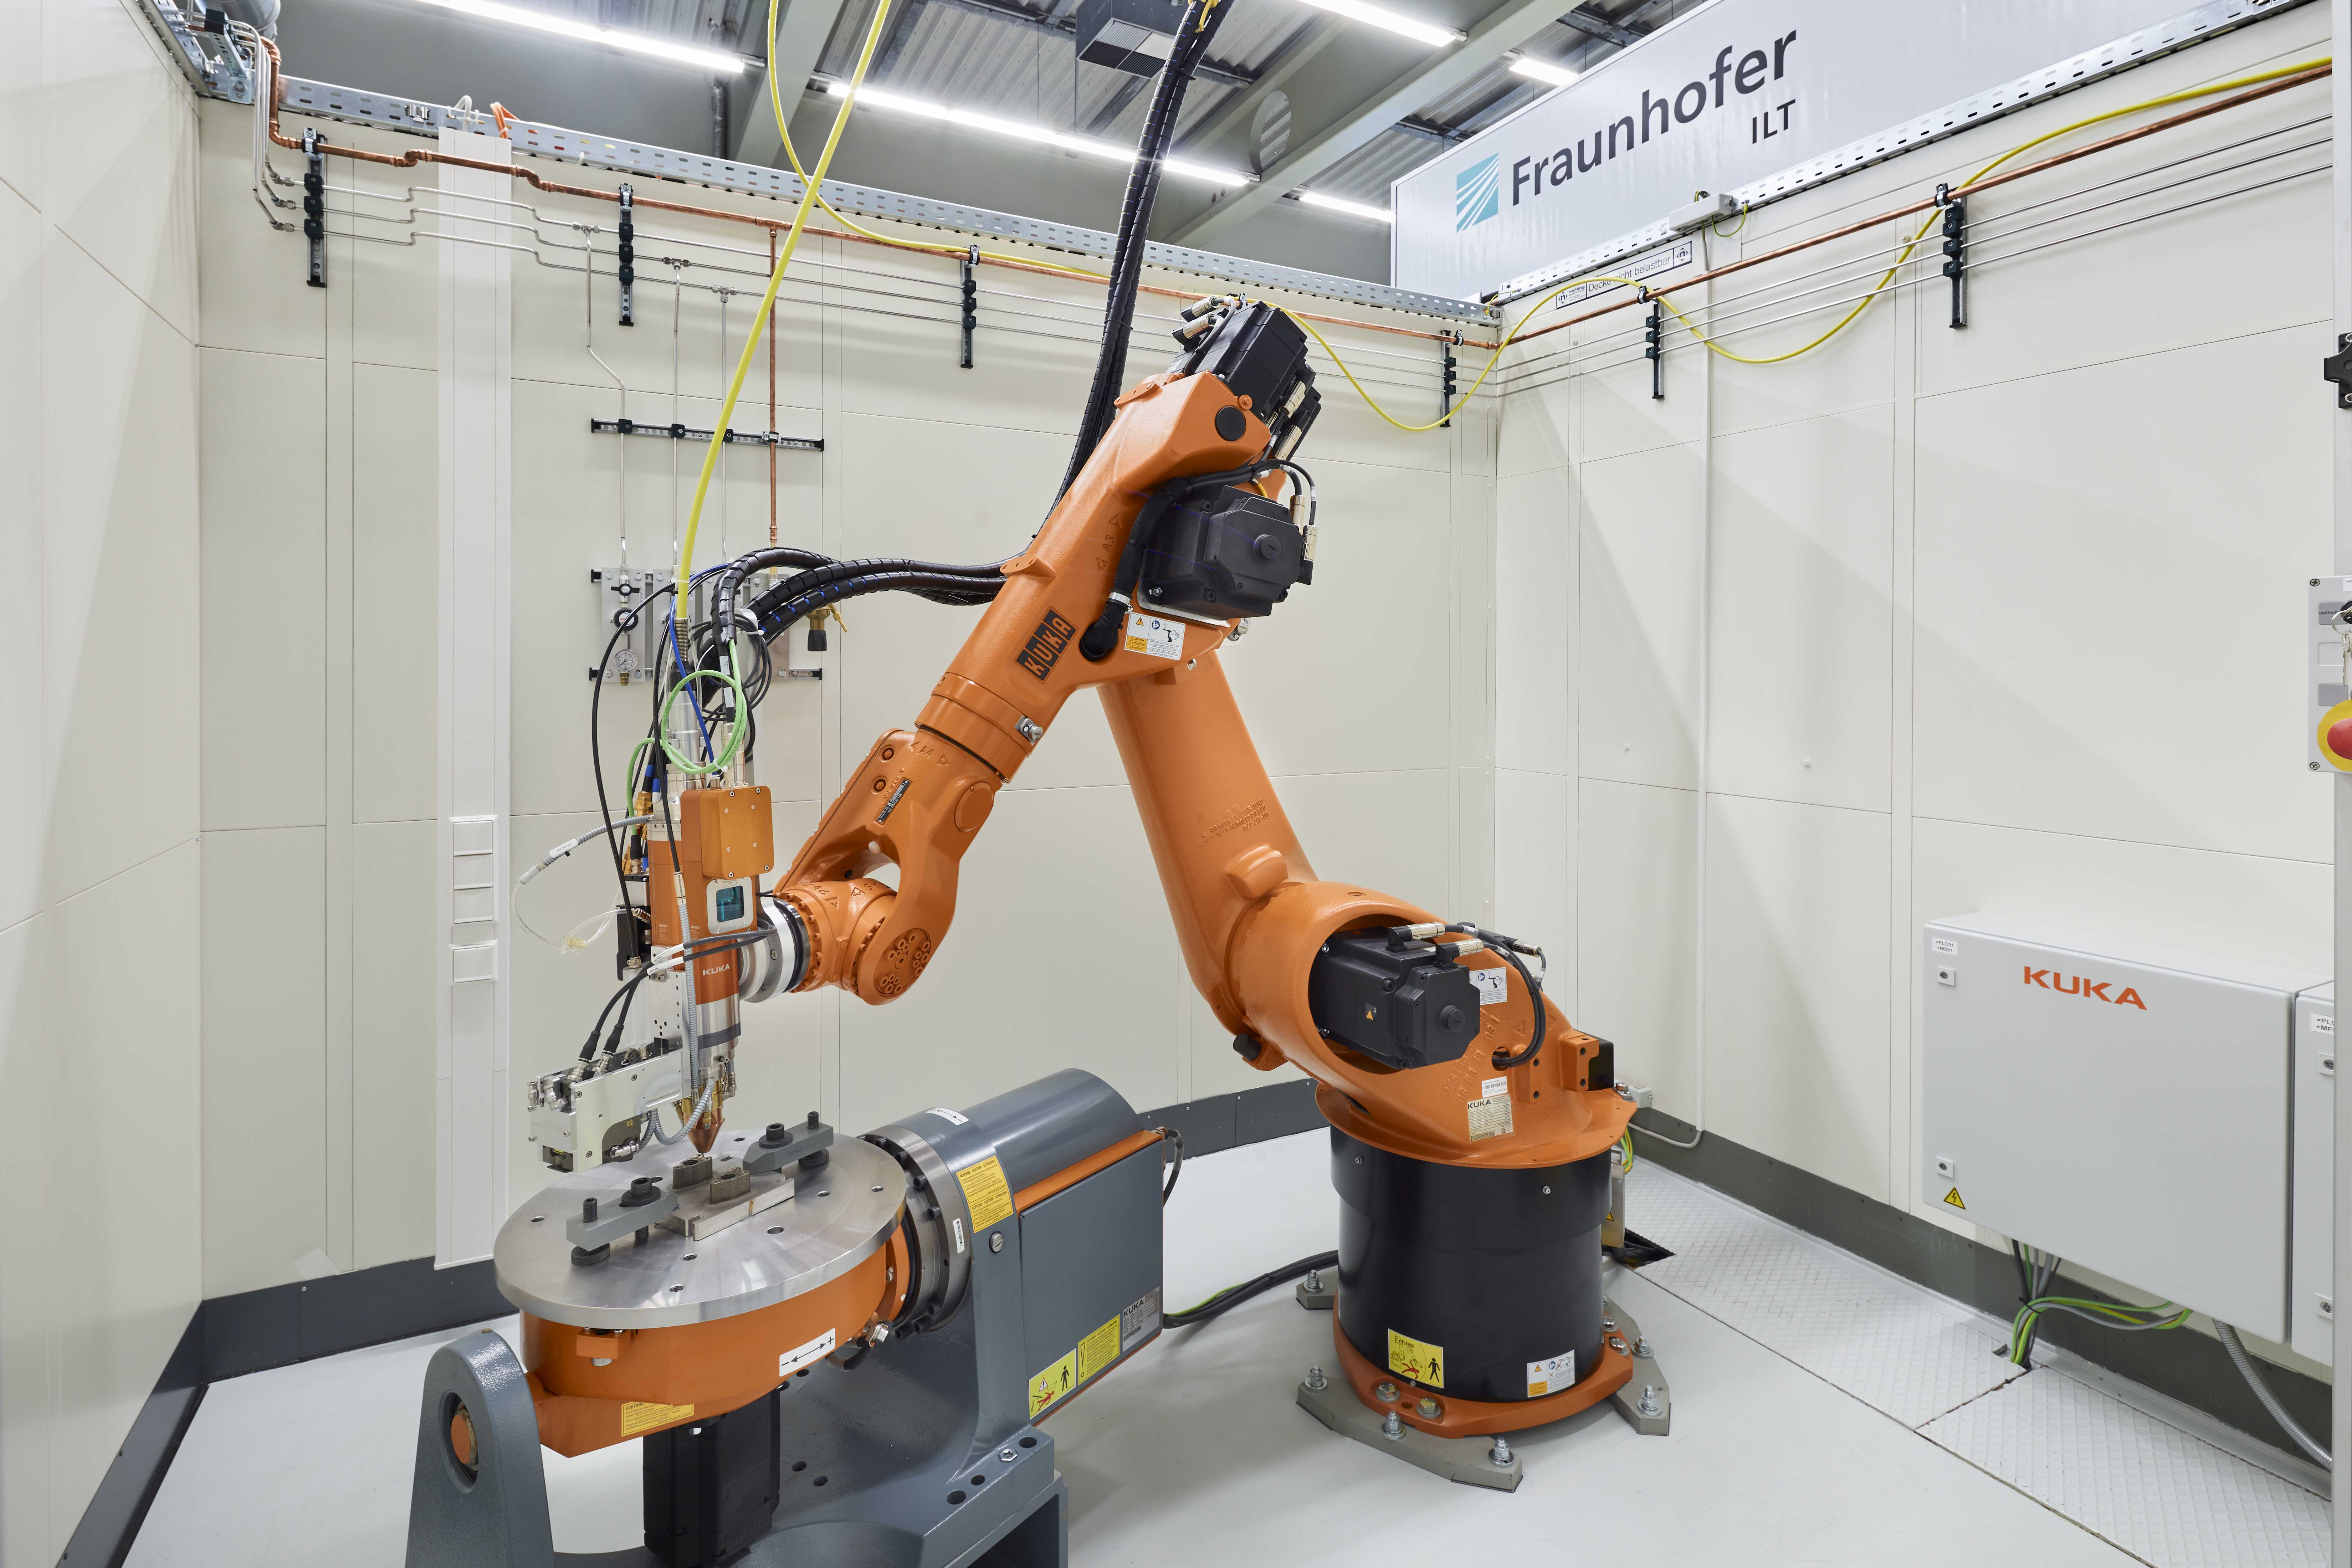 Opportunity for small- and medium-sized enterprises: With additional financial support from the BMBF, Fraunhofer ILT has also developed a less expensive version of the ProLMD robot system for the hybrid-additive manufacturing by LMD, adapted to their needs.